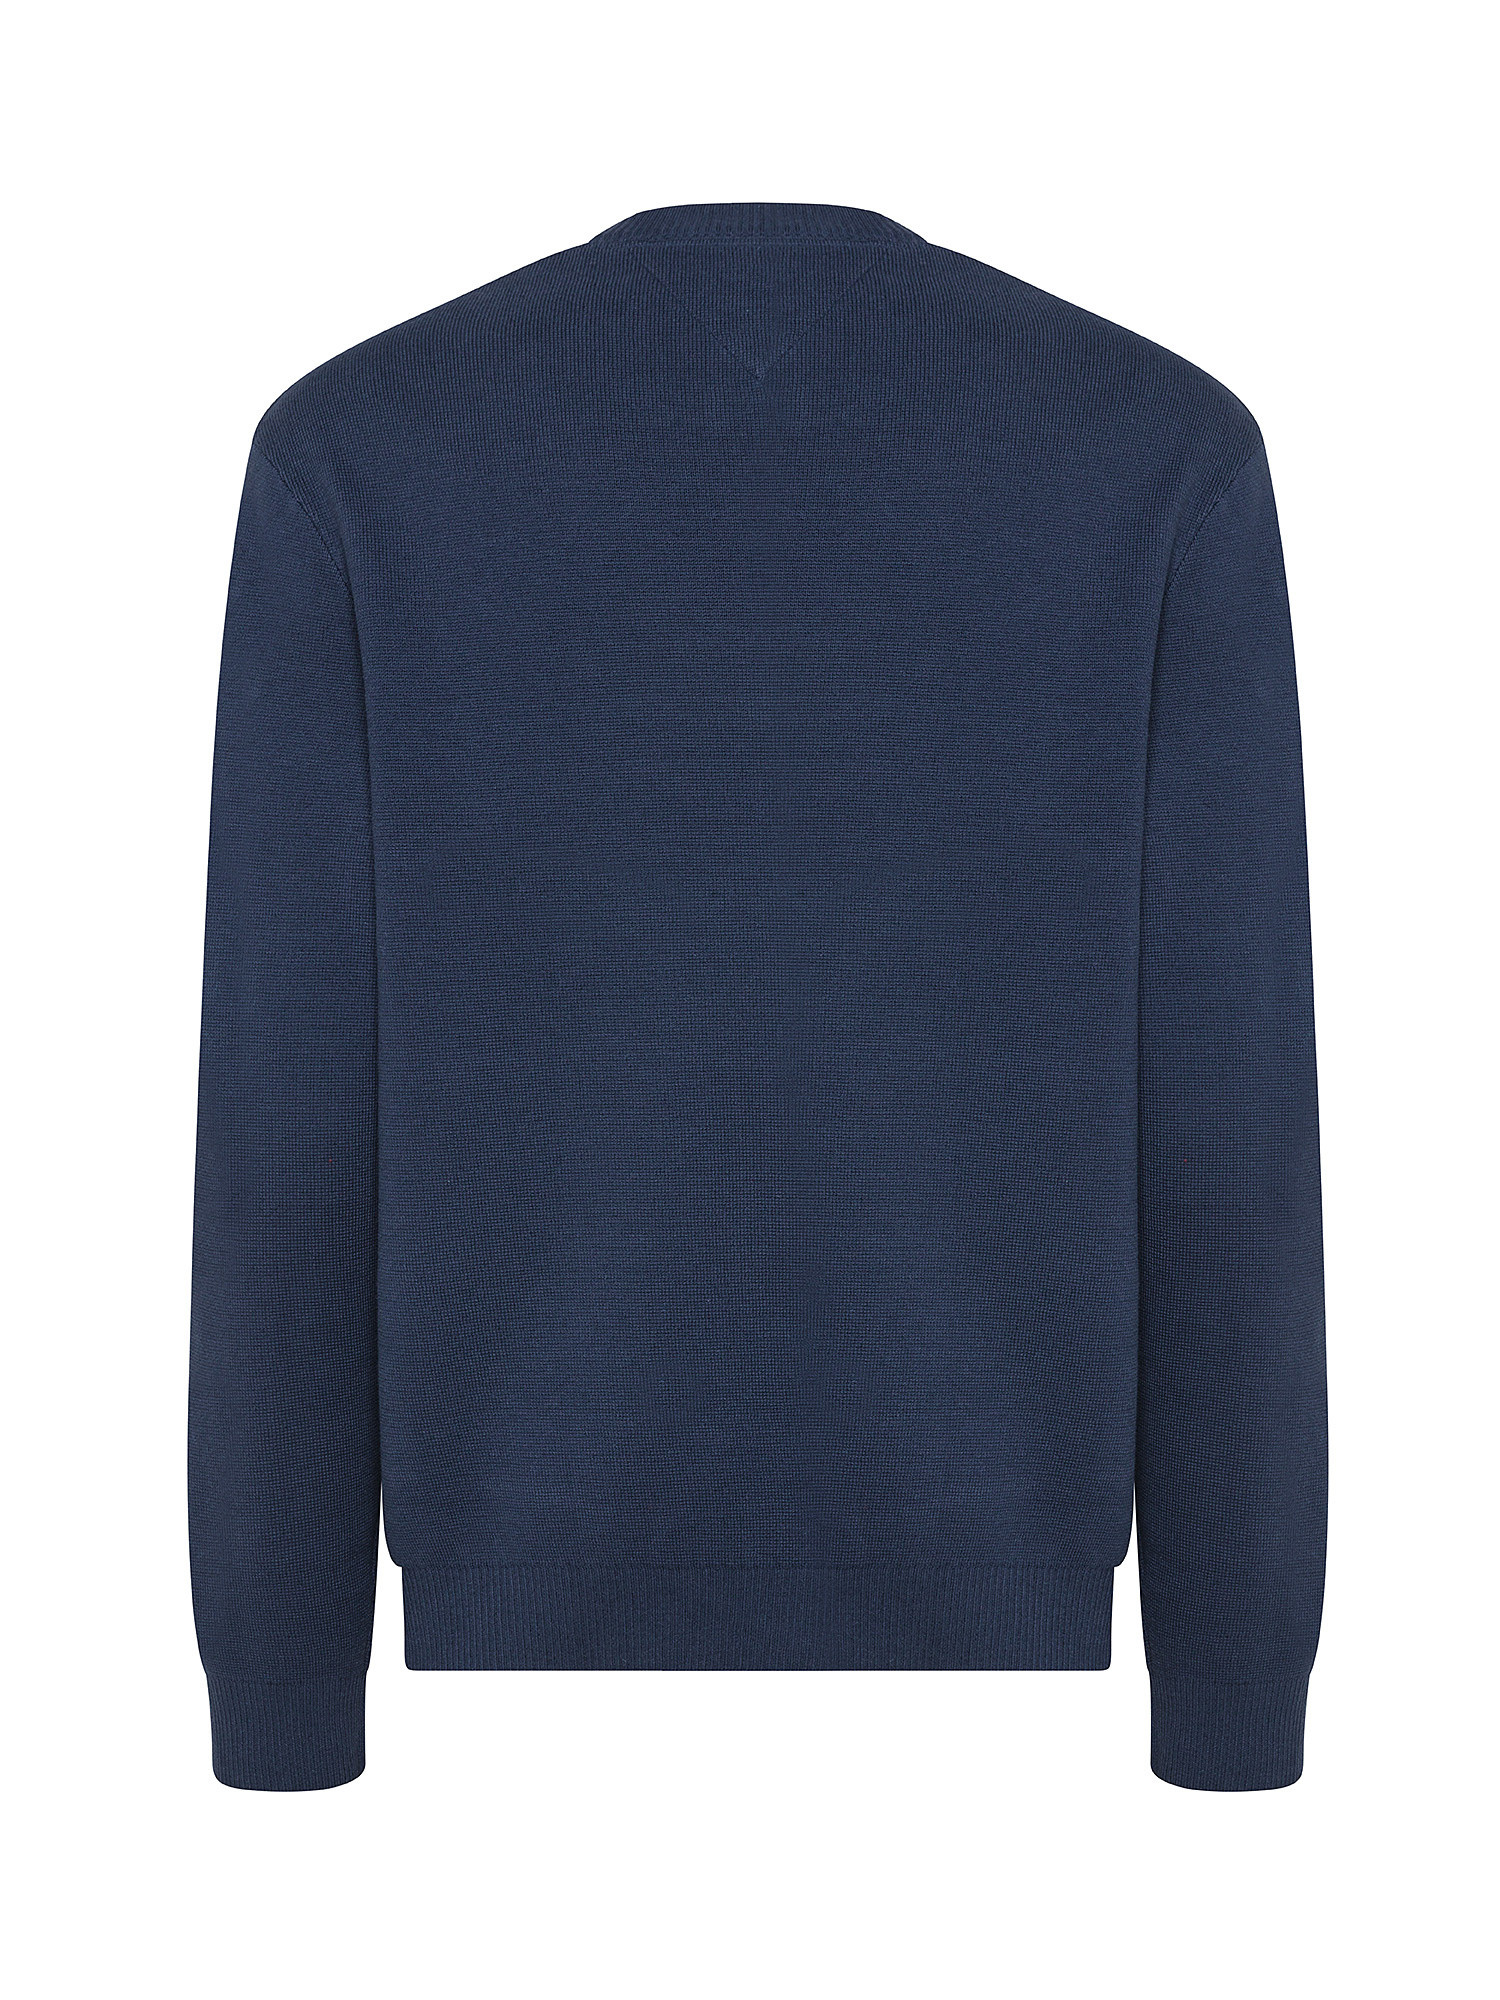 Tommy Jeans - Cotton sweater with embroidered micrologo, Blue, large image number 1